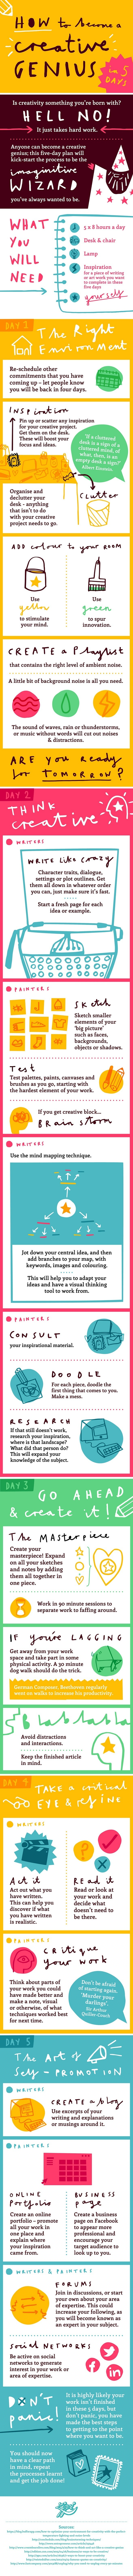 How to Become a Creative Genius Infographic